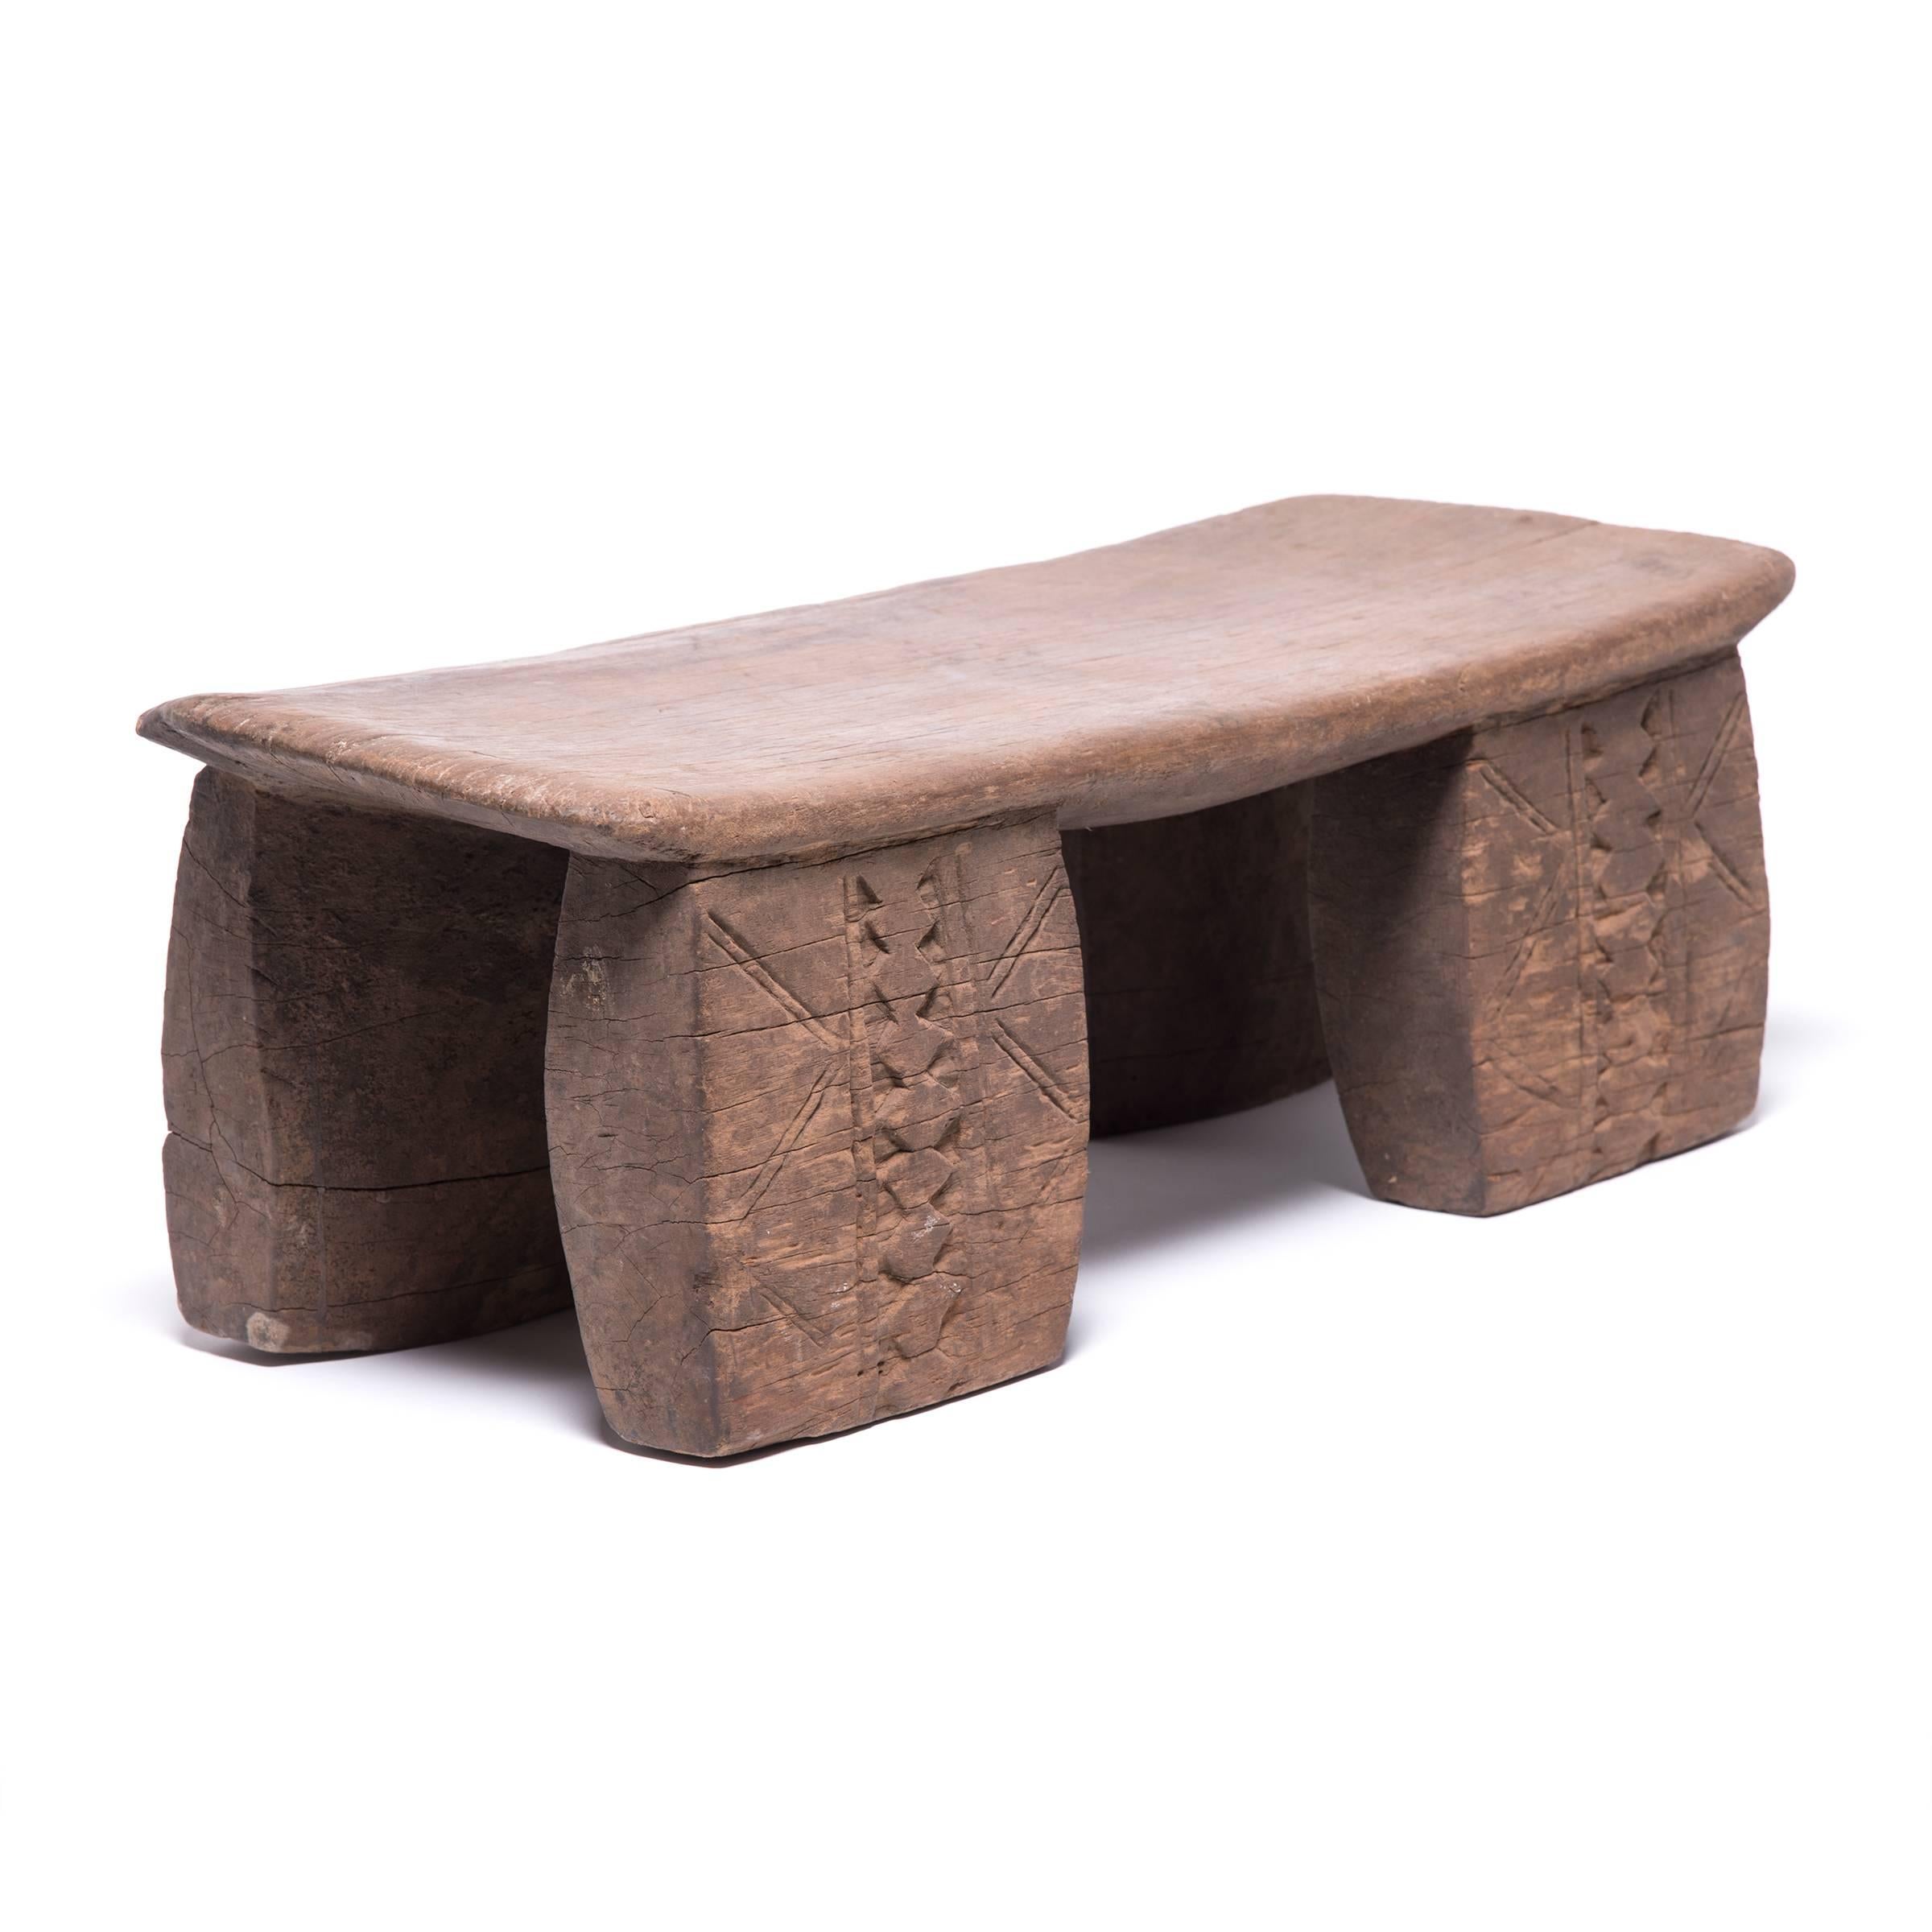 Hand-carved from a single, solid block of wood, each Senufo stool retains a unique personality as a modern sculpture, seat, or table. The irregular strokes and diminutive nature are telltale signs of this traditional woodcarving practice. In